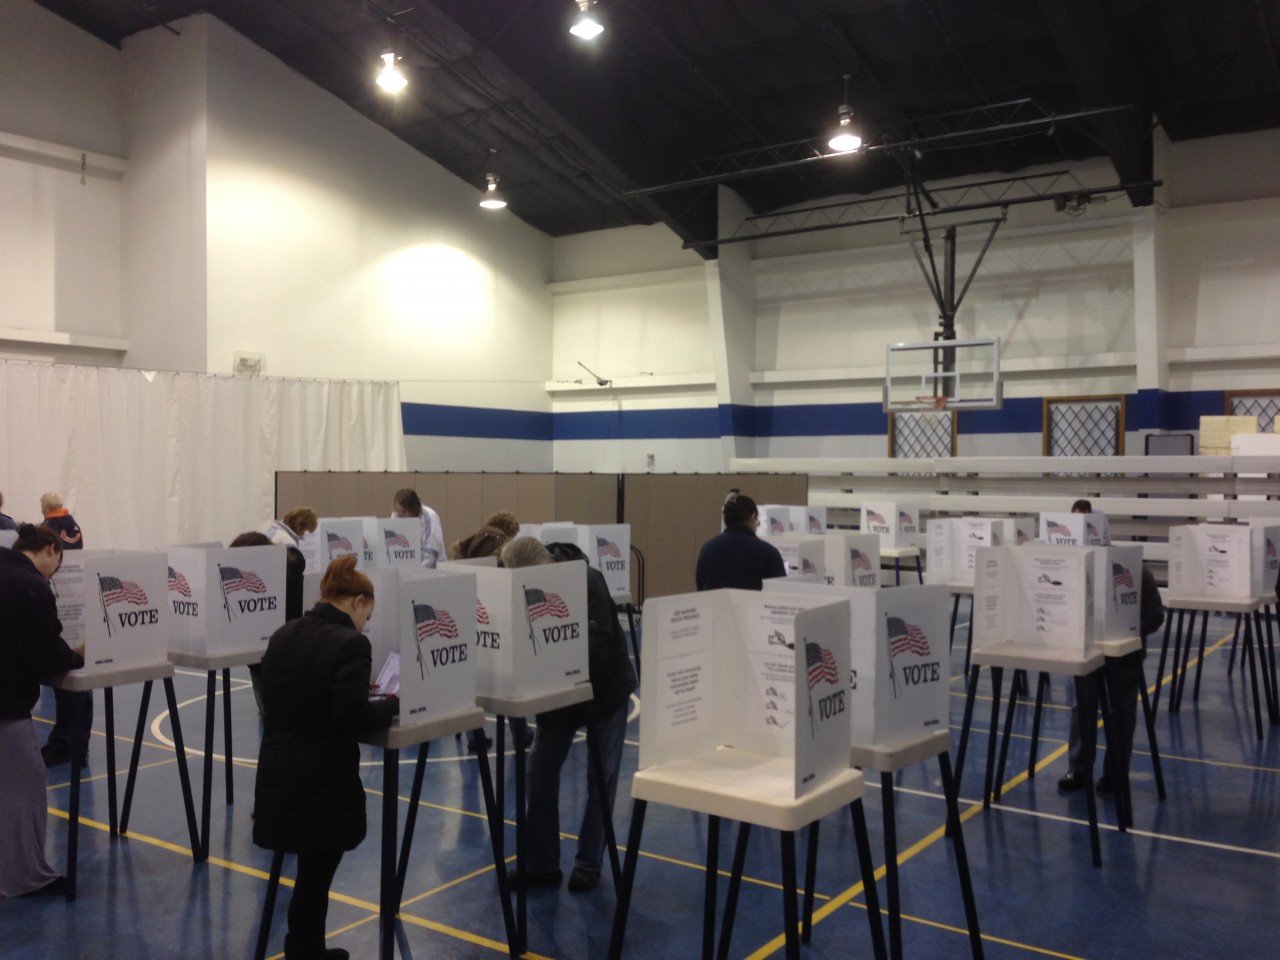 Rows of voting booths in a gym on election day